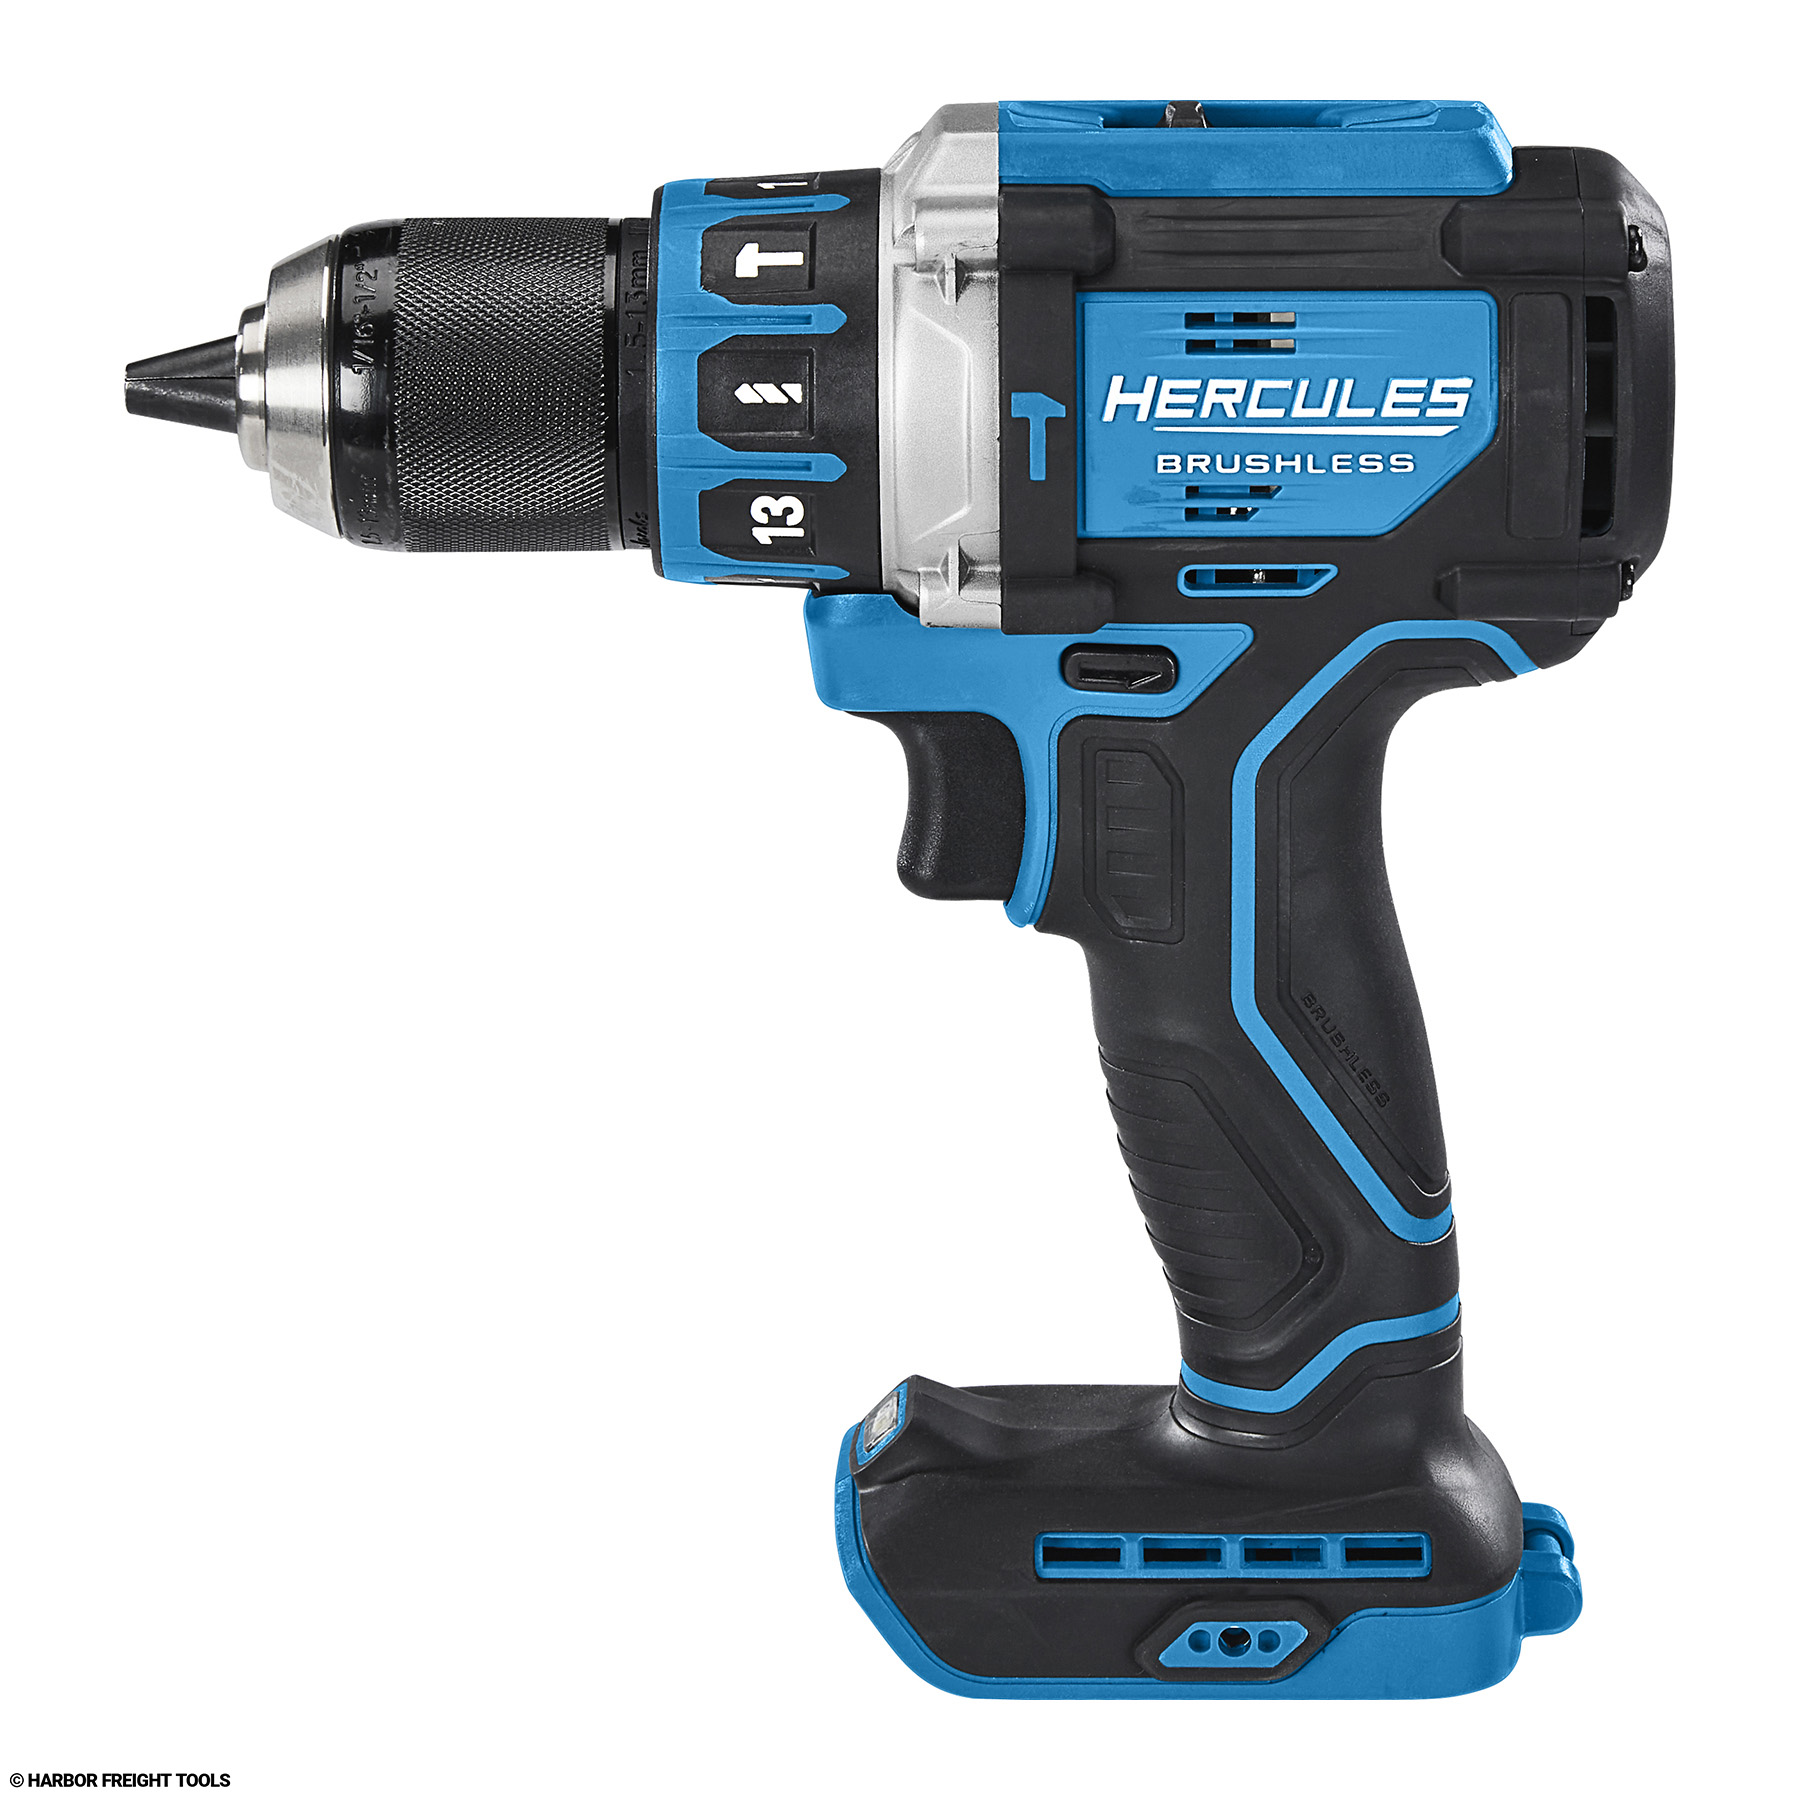 HARBOR FREIGHT TOOLS INTRODUCES NEW BRUSHLESS DRIVERS AND DRILLS TO ITS  PROFESSIONAL HERCULES® LINE - Harbor Freight Newsroom